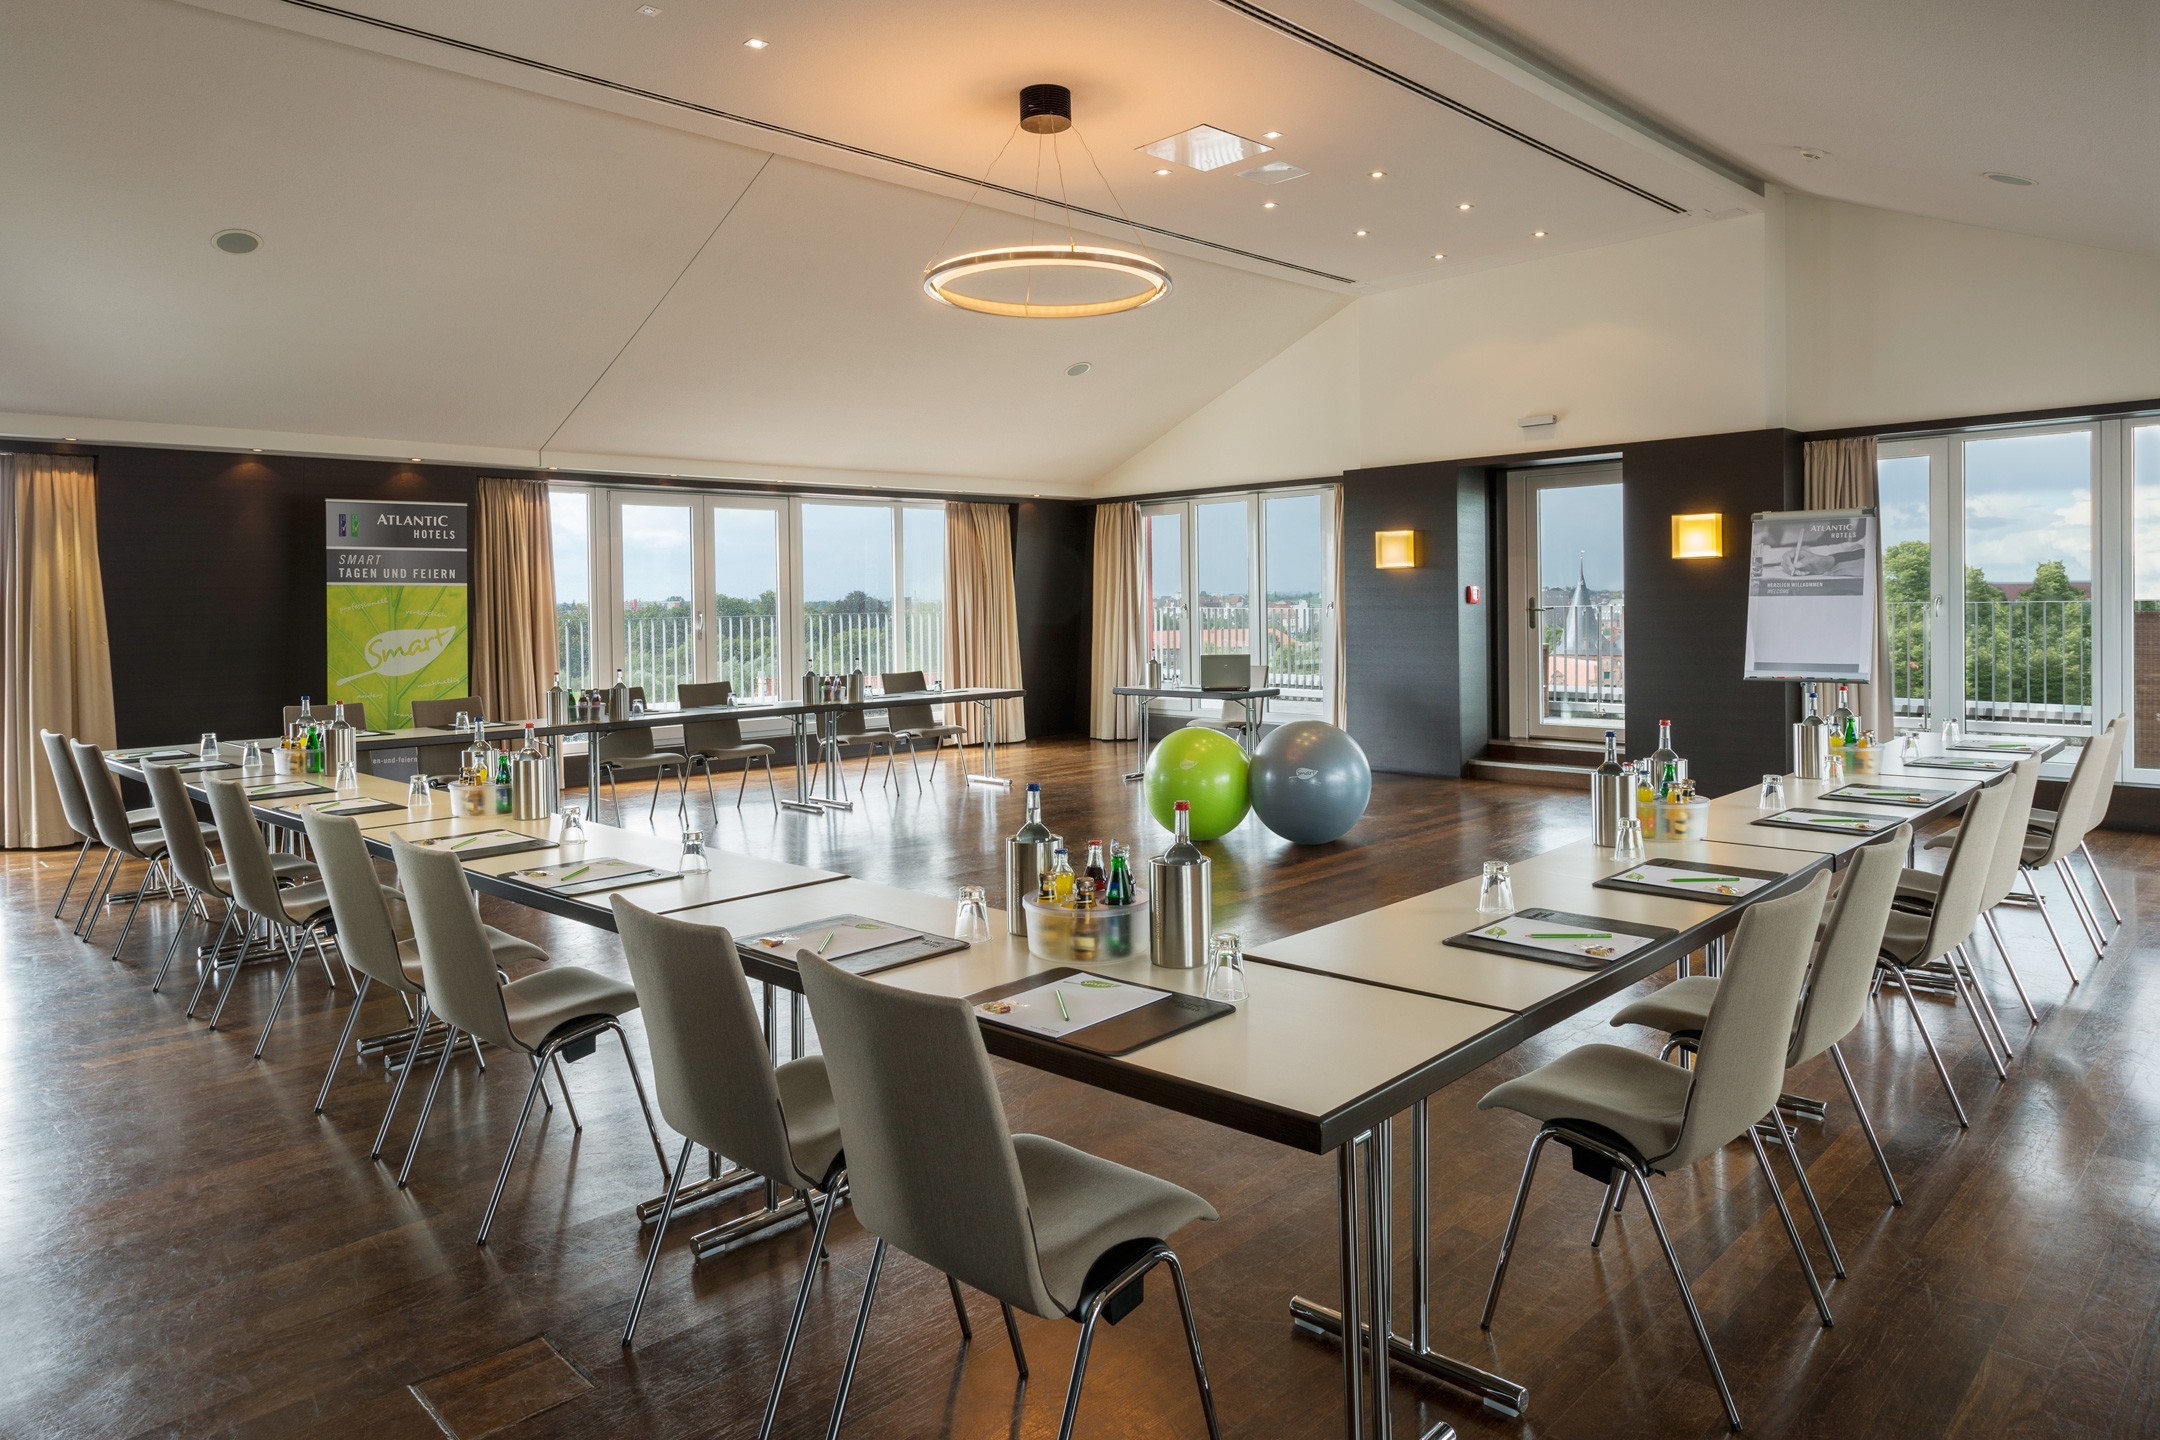 Roof Lounge at the ATLANTIC Hotel Lübeck, perfect place for business meetings or private parties